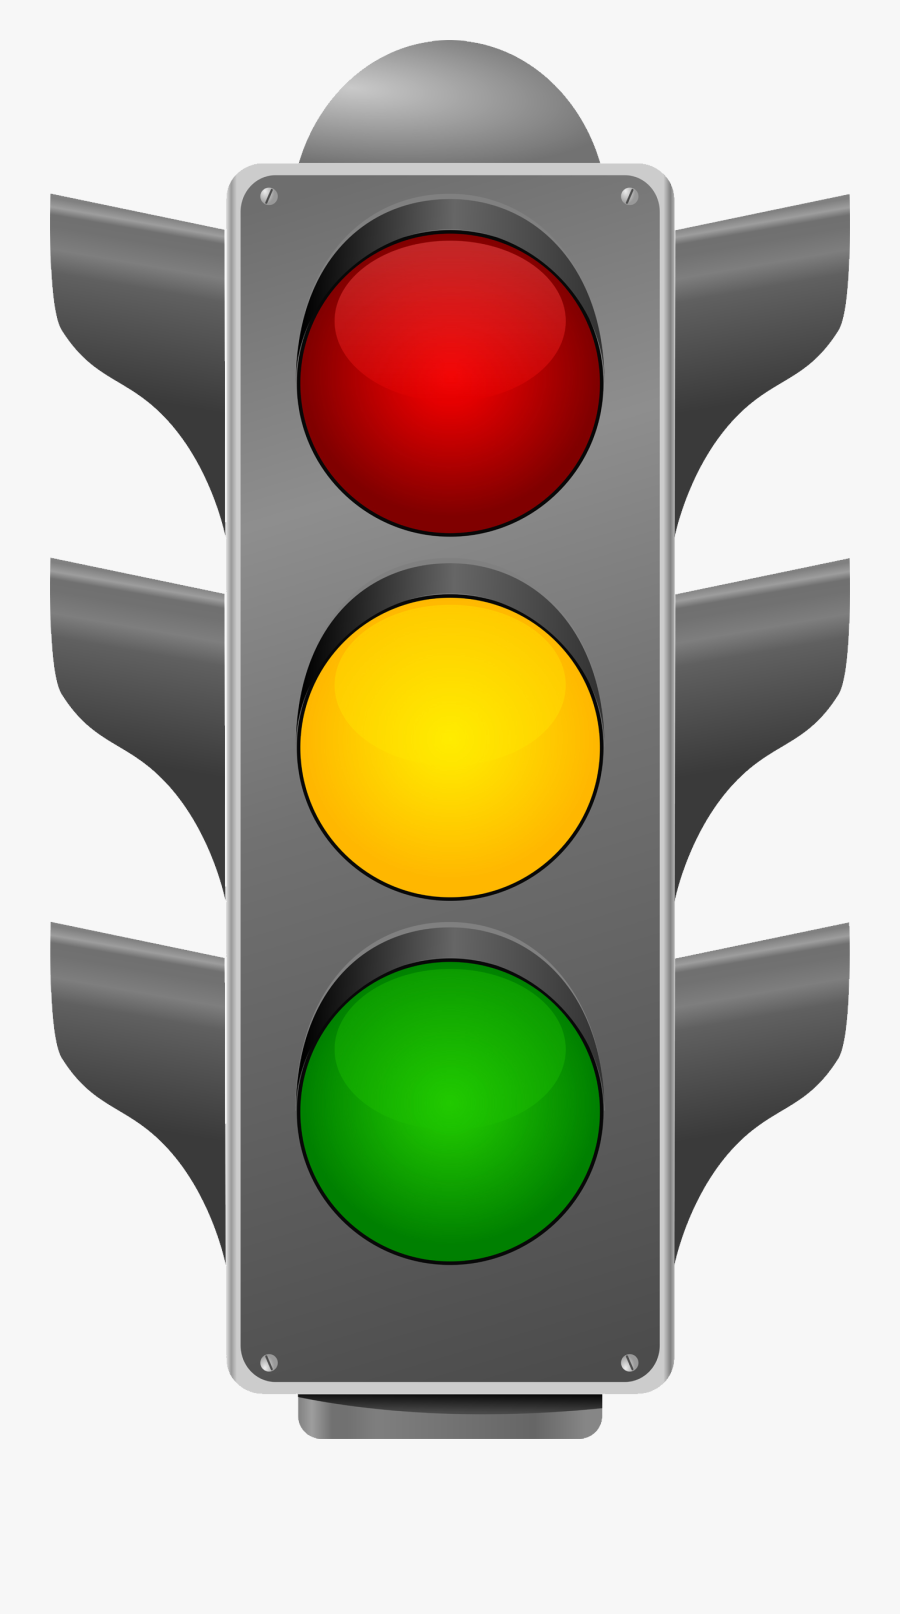 Traffic Light Png Image - Animated Traffic Light Gif, Transparent Clipart